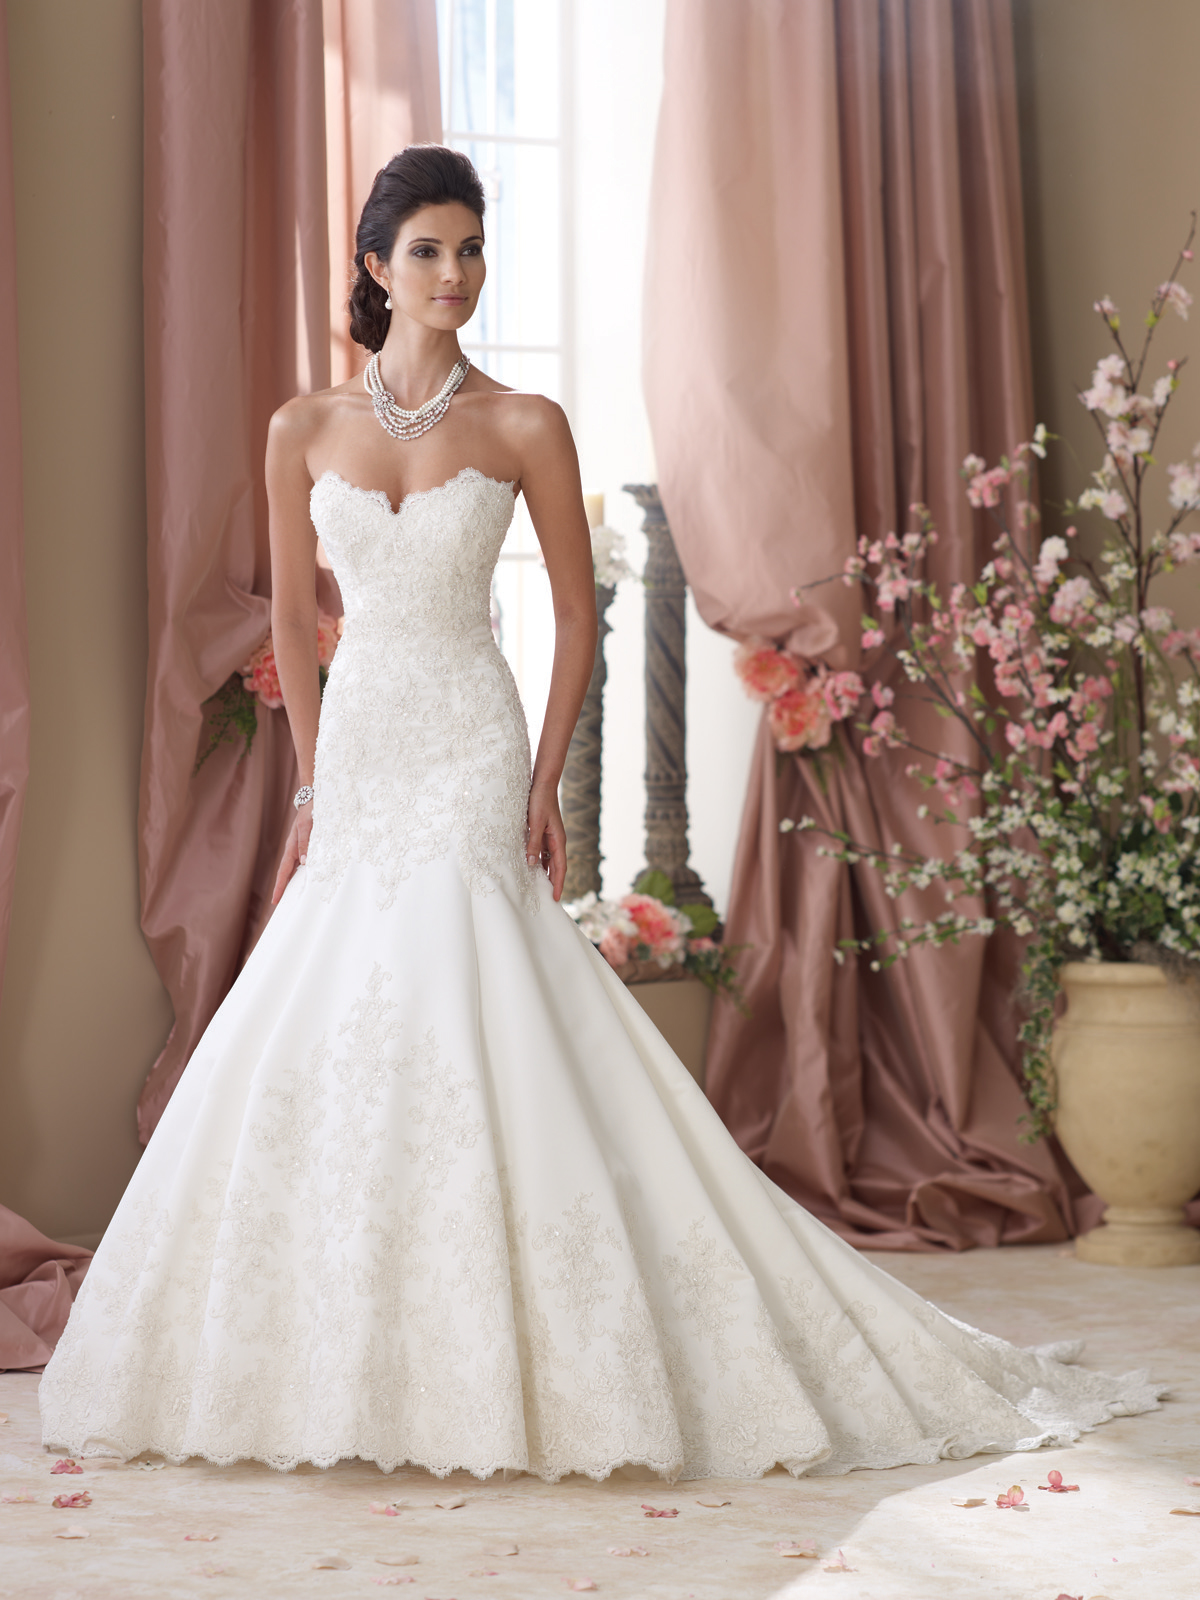 Best Wedding Dress Gown in the world Check it out now | weddingstyle1